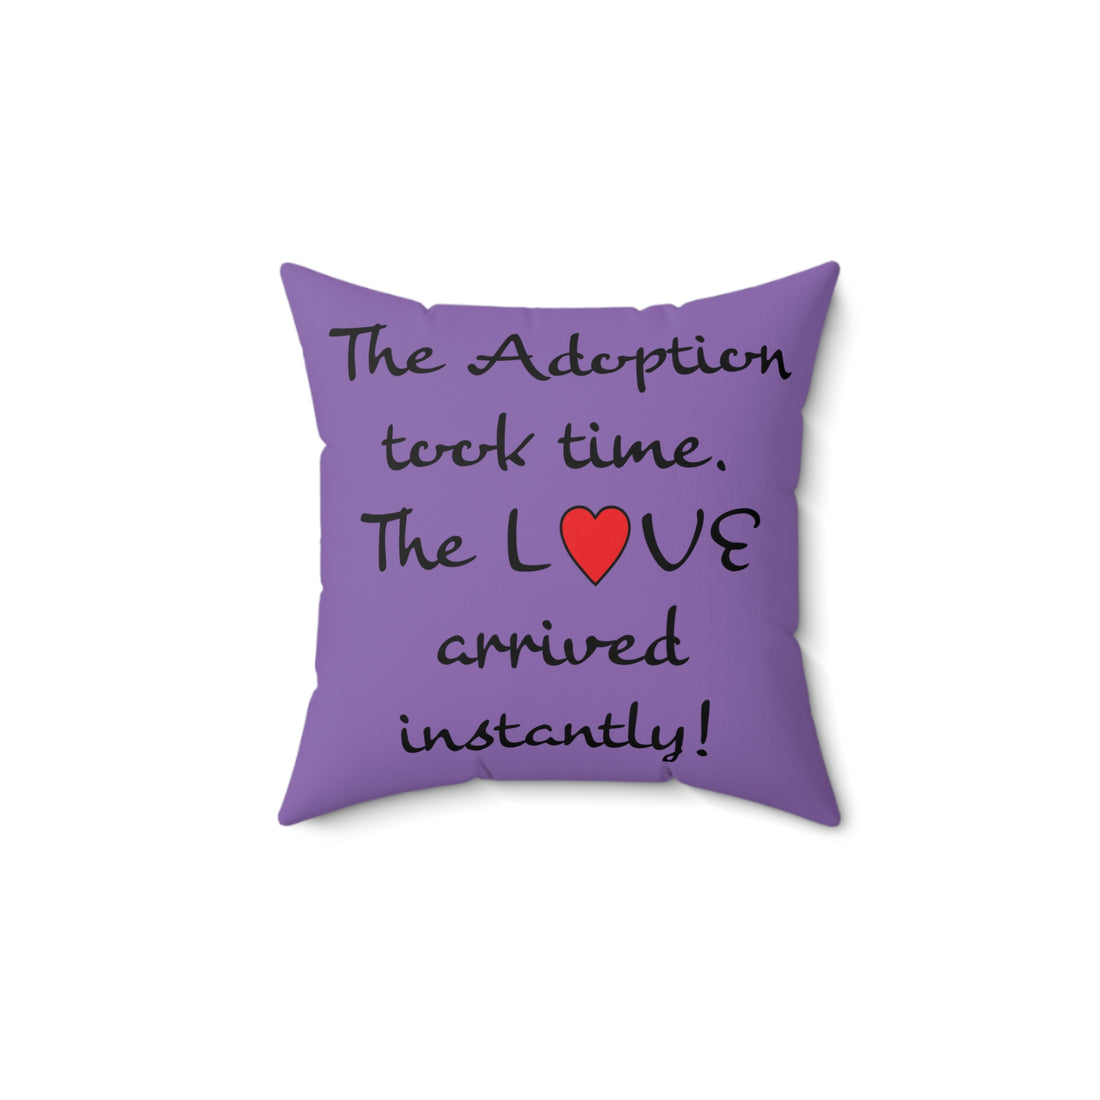 The Adoption took time the Love came instantly - Pillow